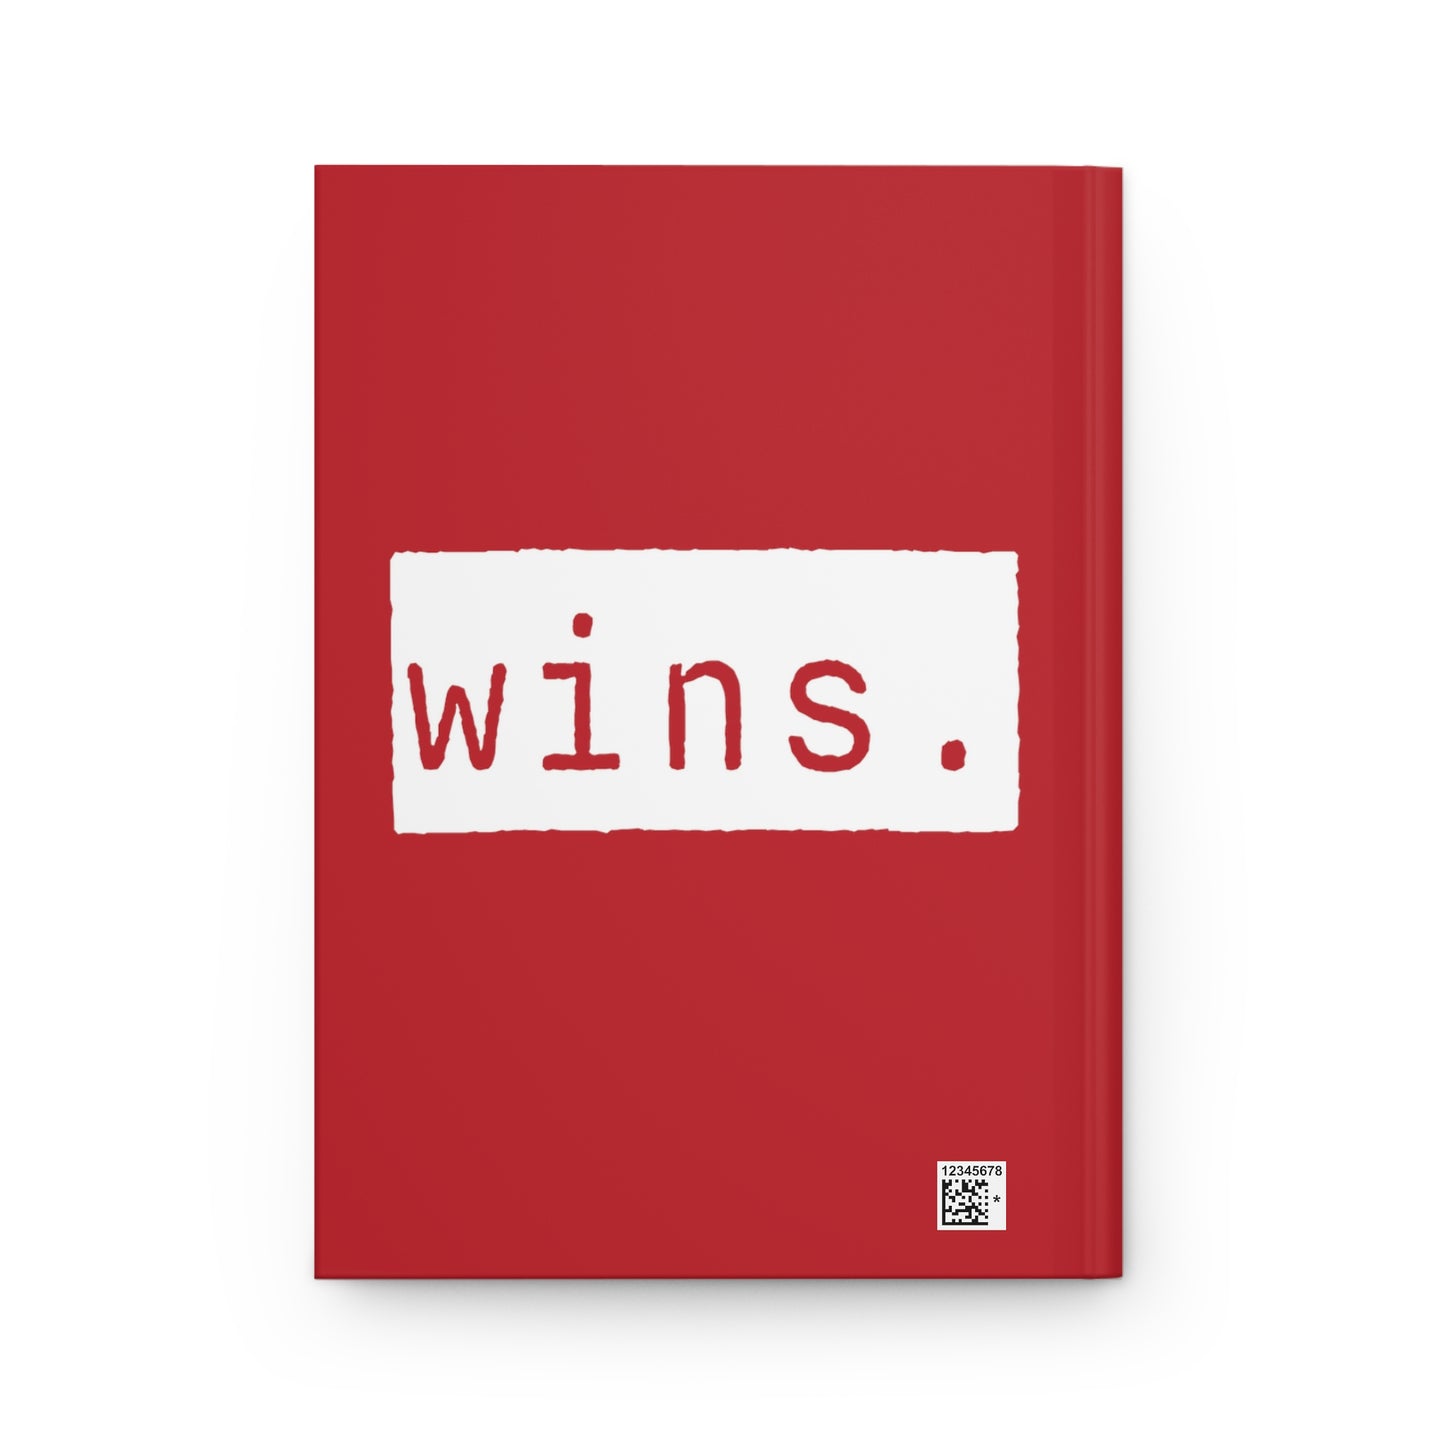 Wins Red Matte Hardcover Journal | Blank Book for Ideas | Lined Notebook Diary Log, Gratitude and Positive Thinking